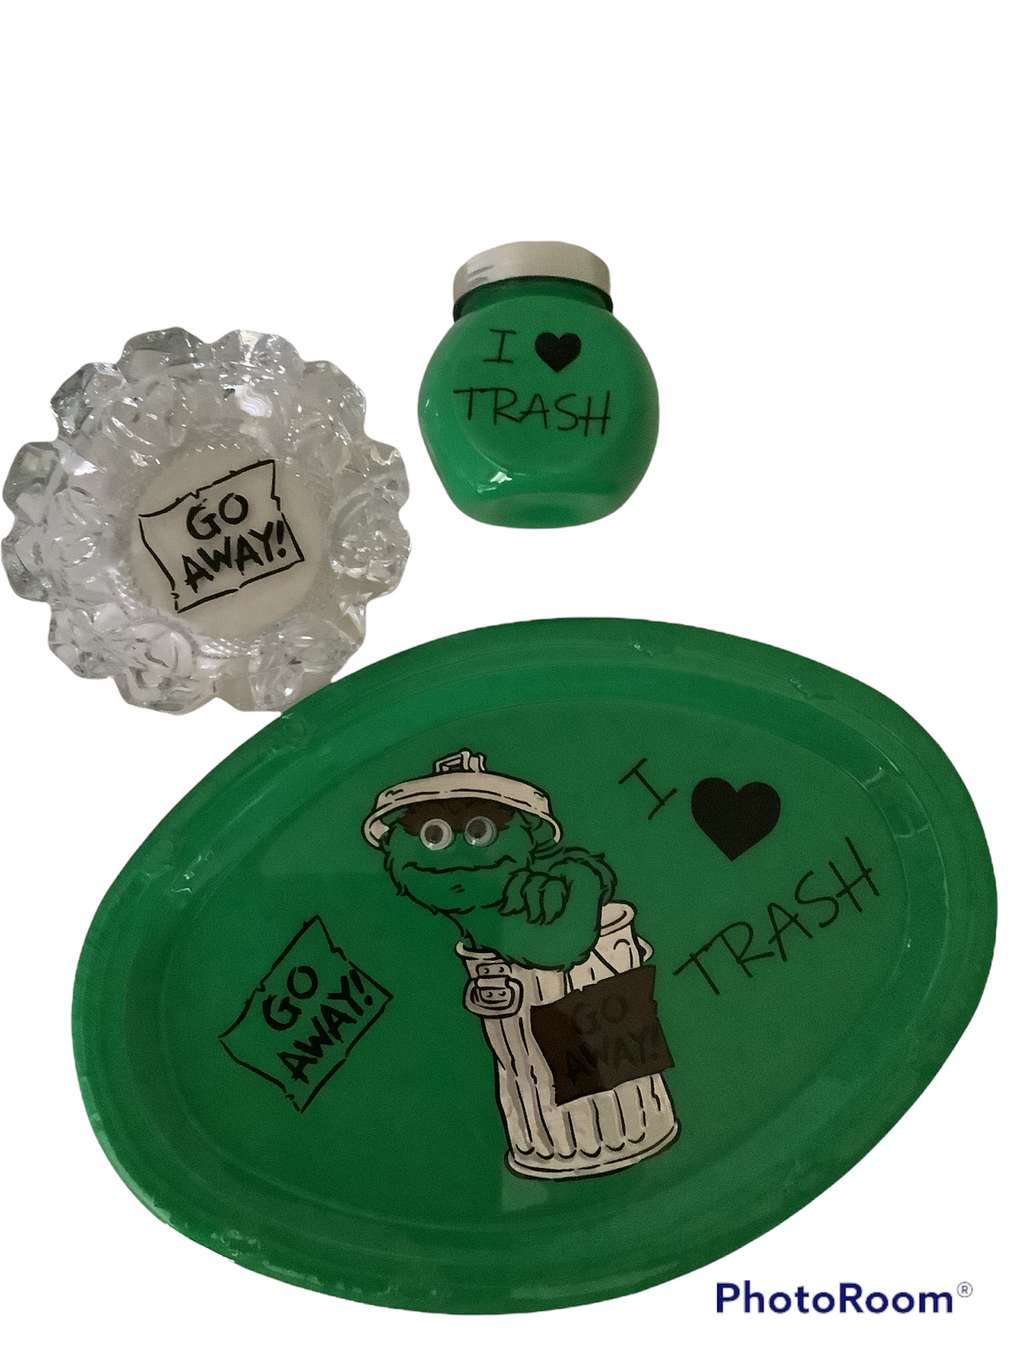 Oscar the grouch rolling tray set